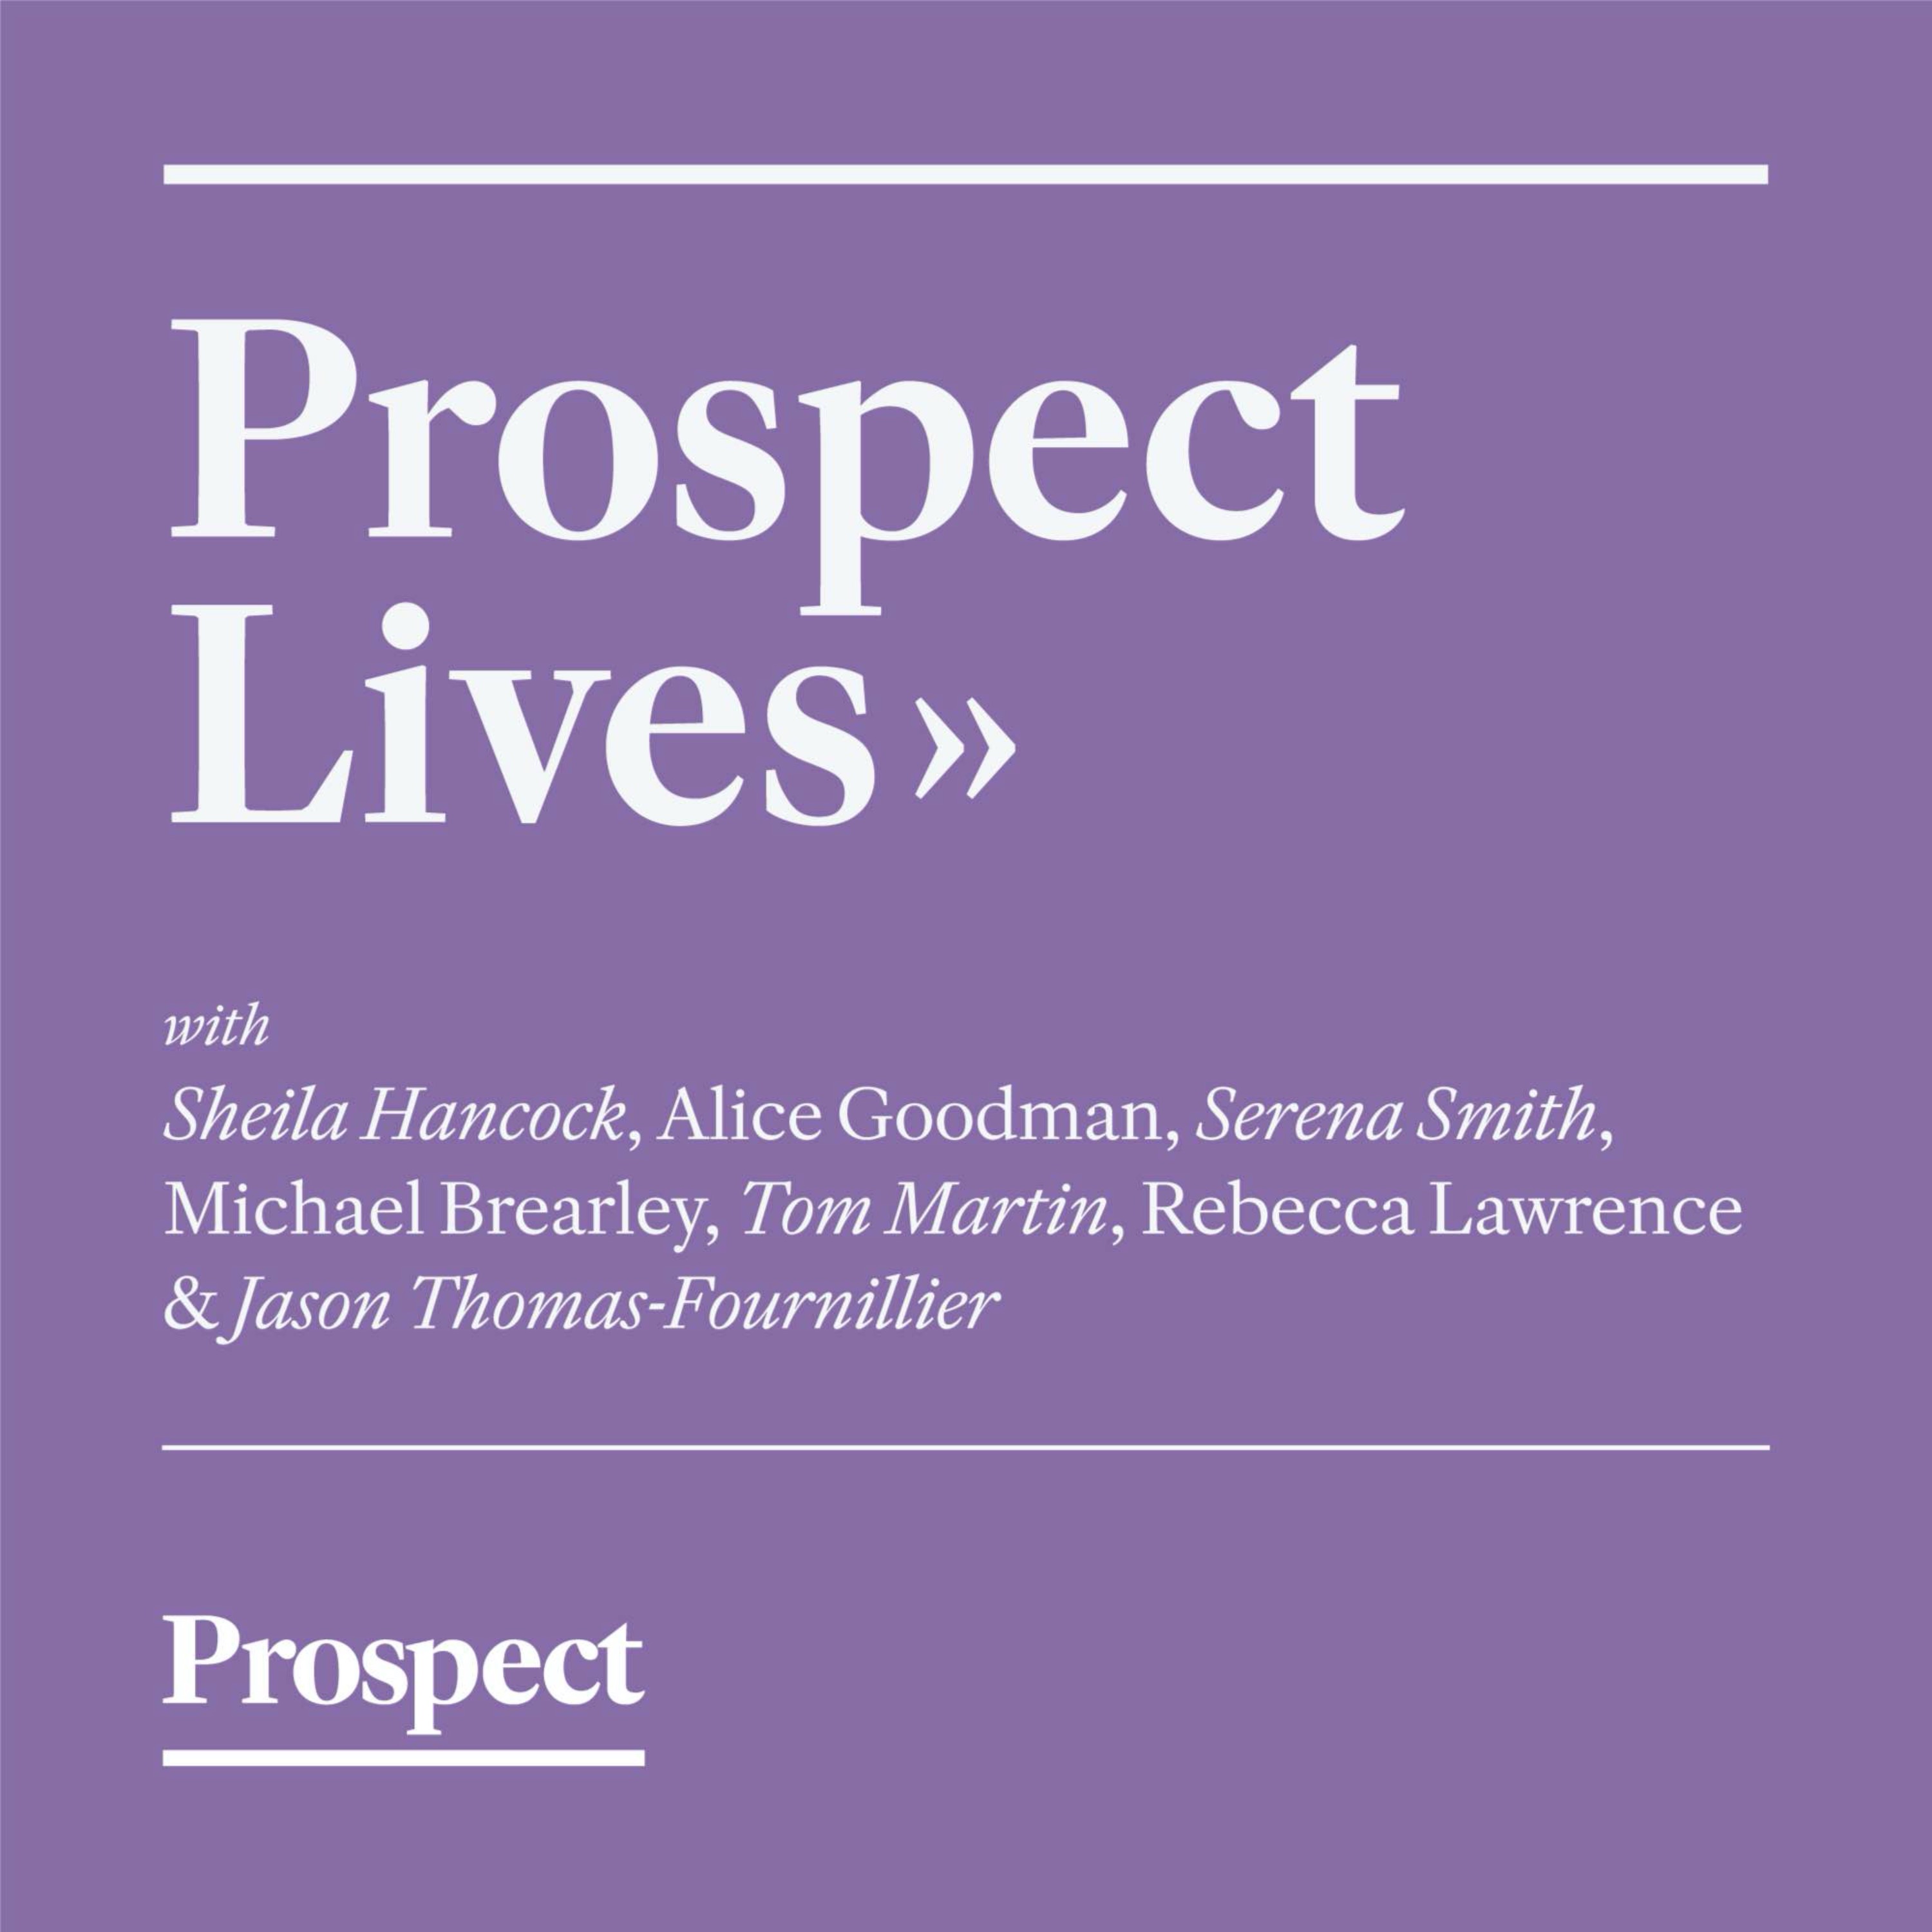 Prospect Lives: Haircuts, burnout and belonging